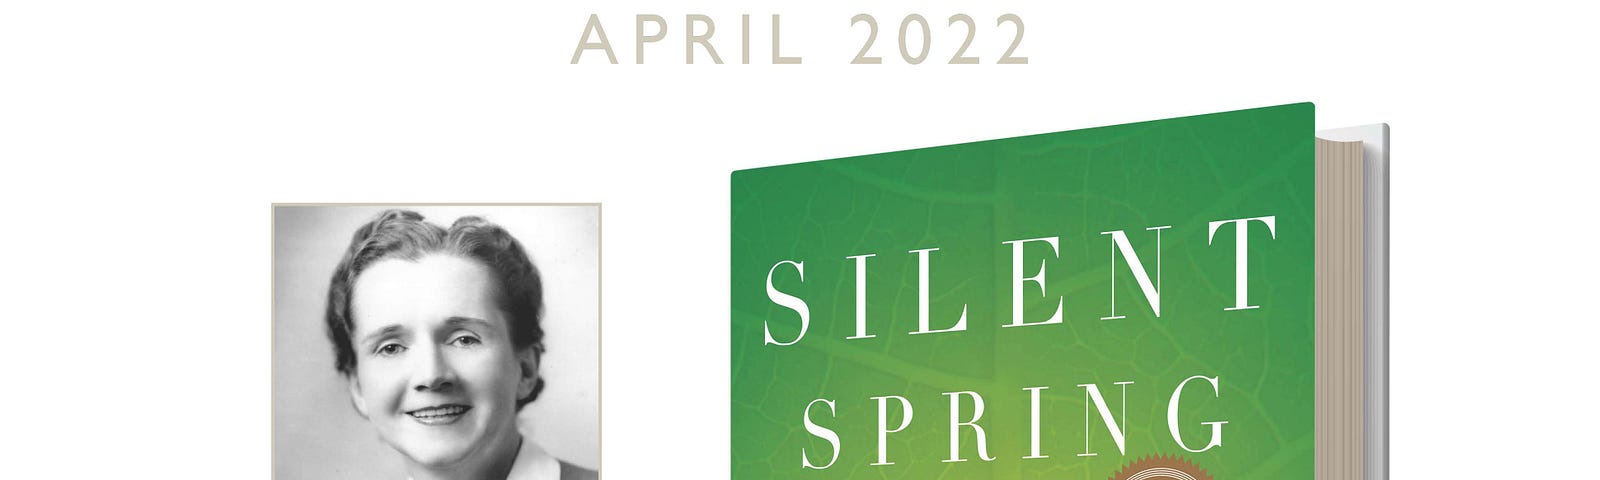 Poster for America’s Wild Read April 2022 with head and shoulders image of author and image of book cover for Silent Spring. Graphics: Richard DeVries/USFWS